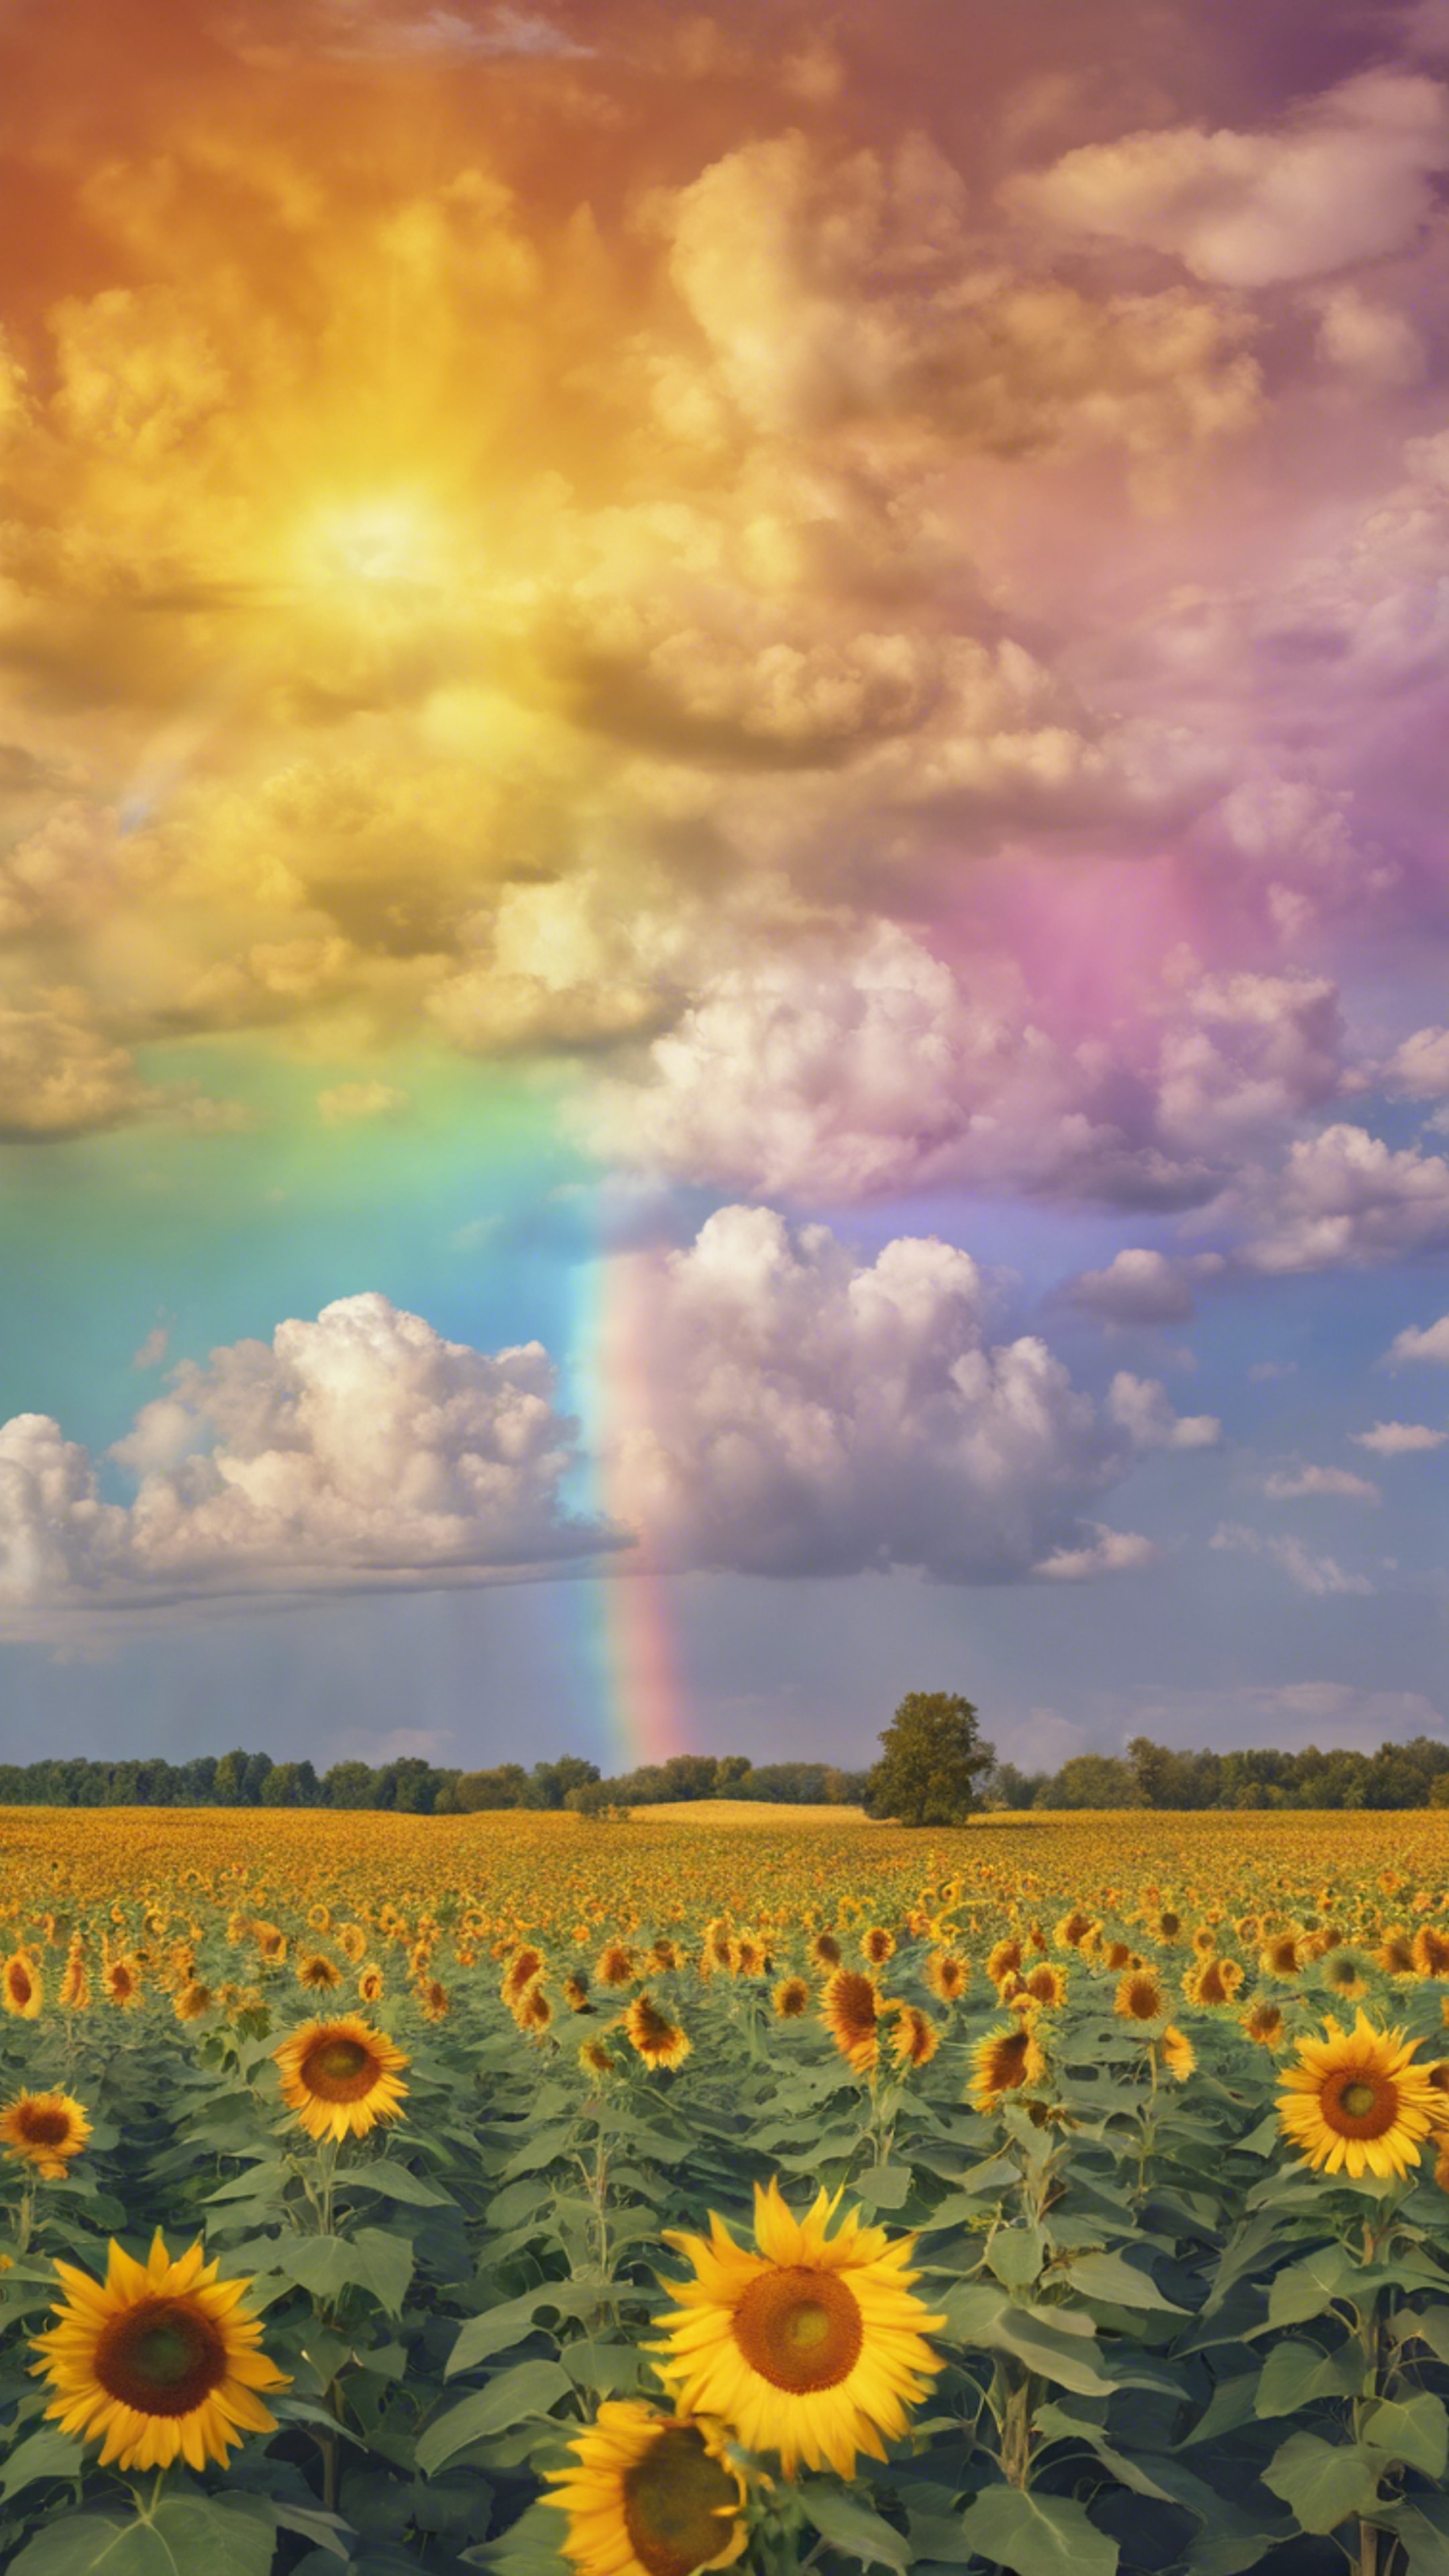 A rainbow painting the sky above a field filled with blooming sunflowers. Wallpaper[e6220dfb5e5d40d4aebc]